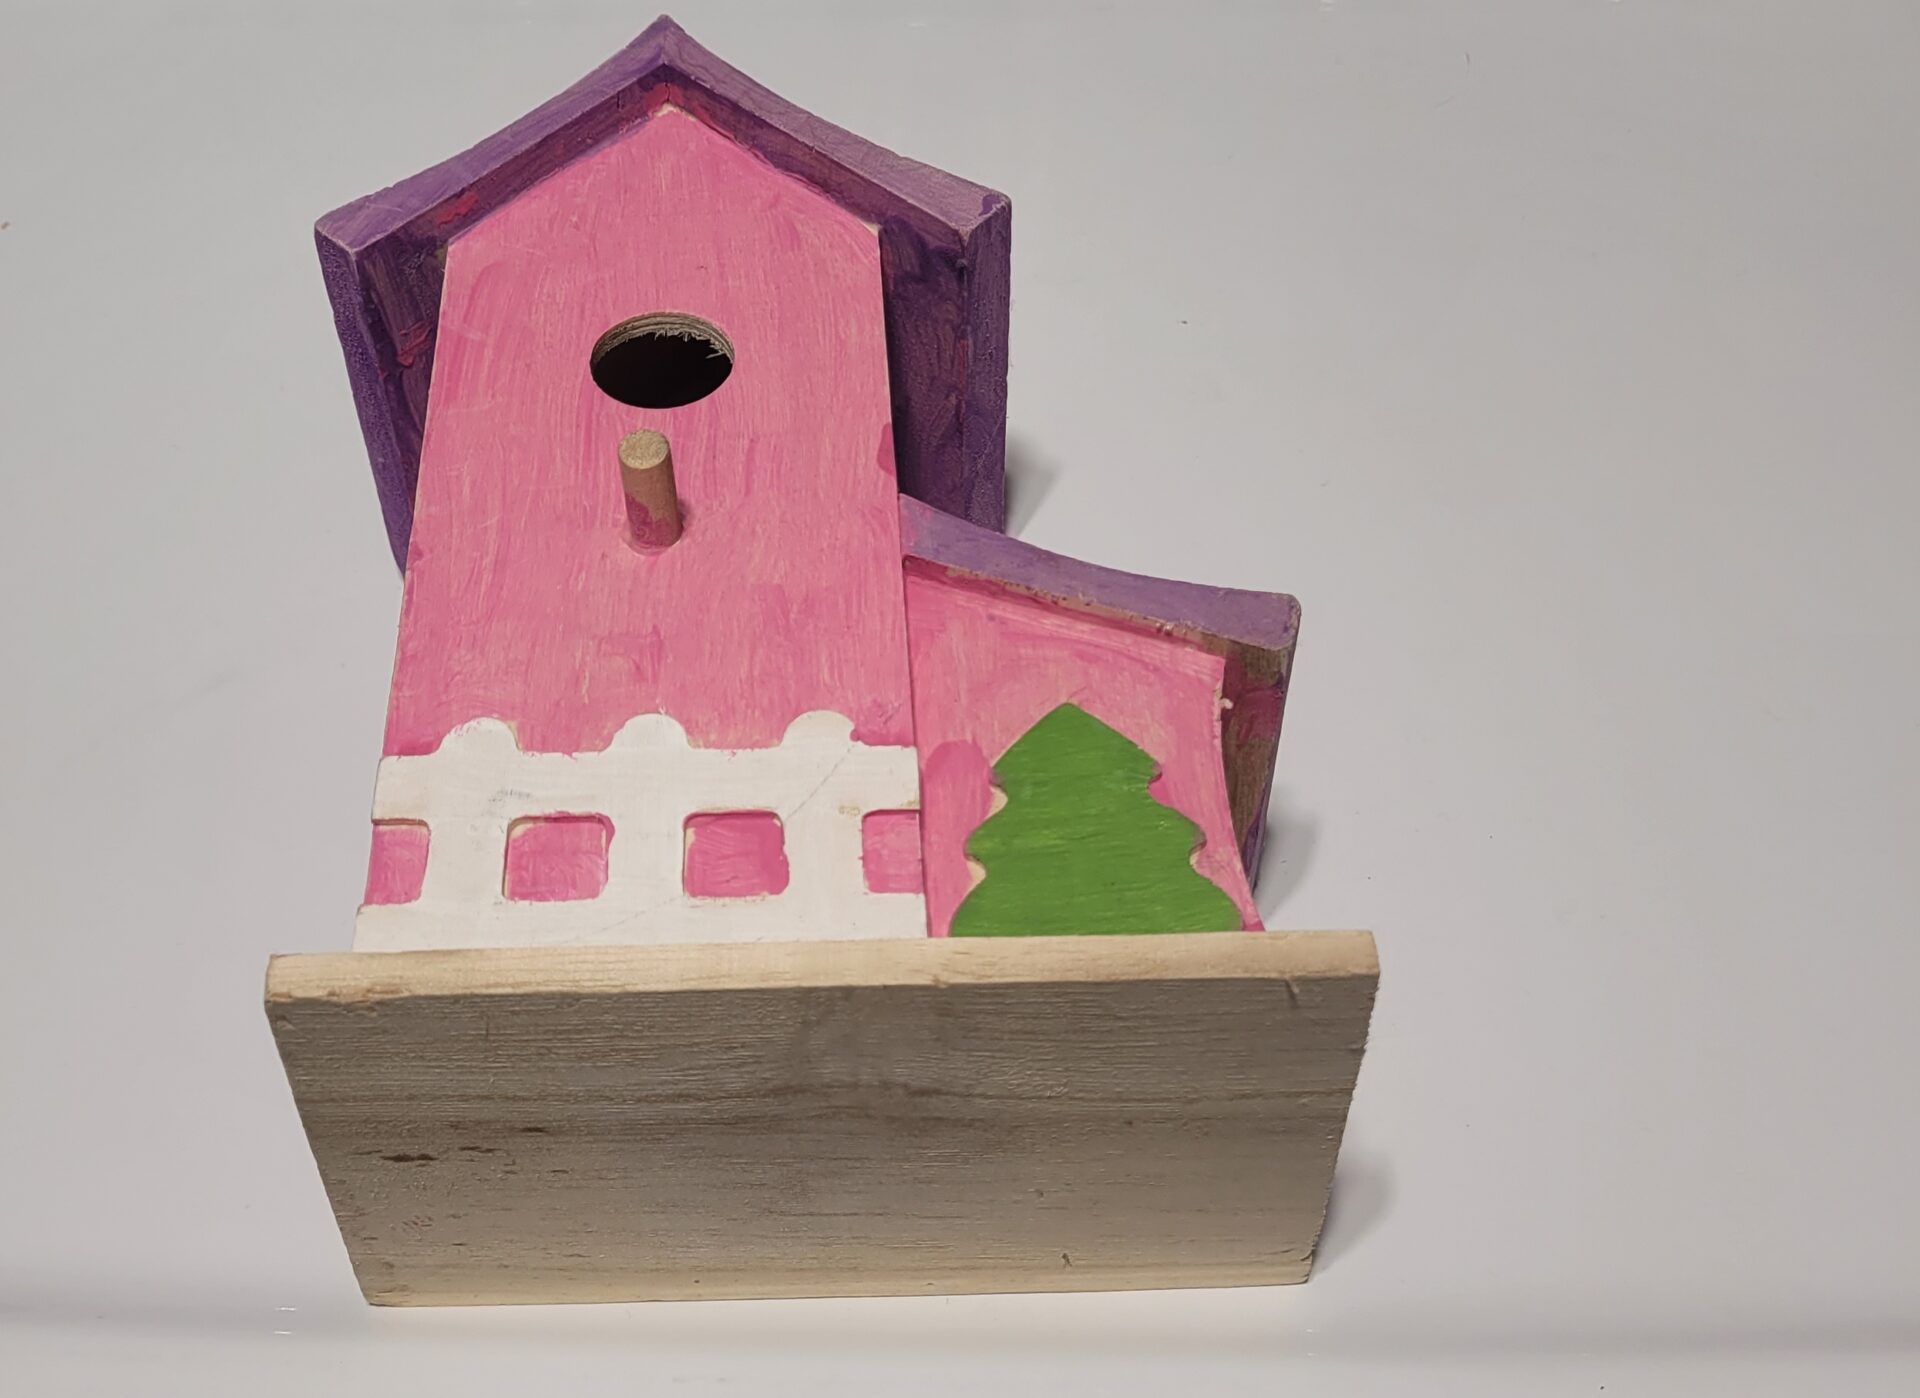 An image of a handmade wooden house as an example for toy maker number 97 on our list of backyard business ideas